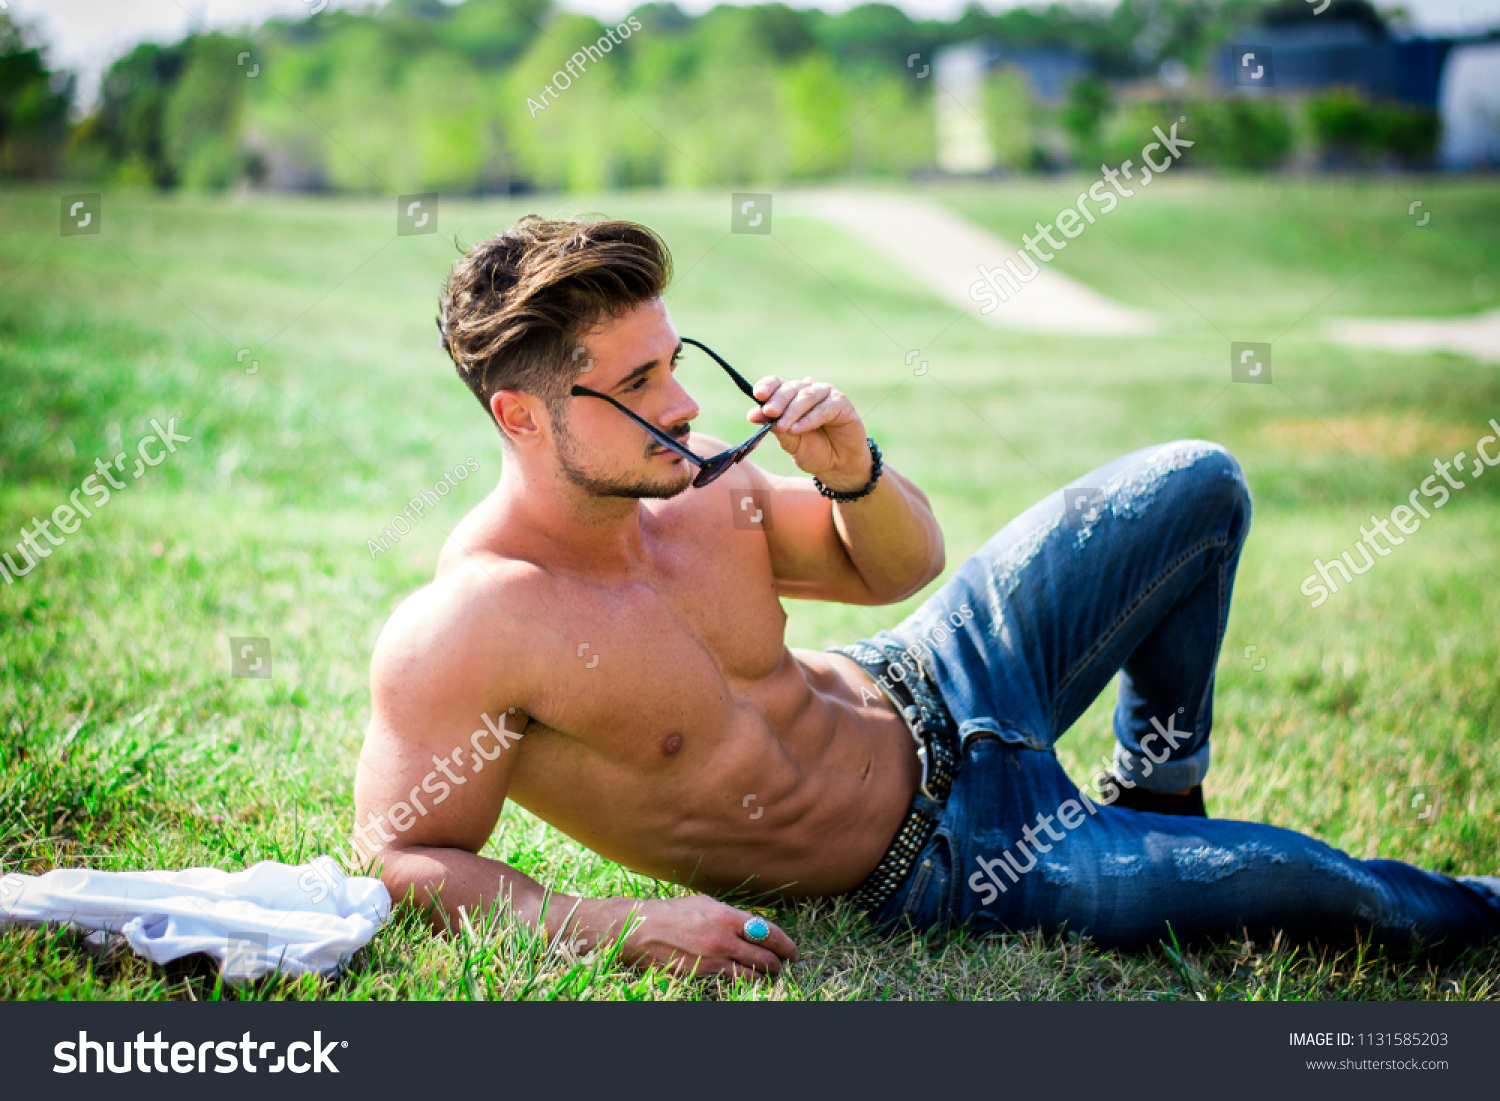 Good Looking Shirtless Fit Male Model Stock Photo Edit Now 1131585203